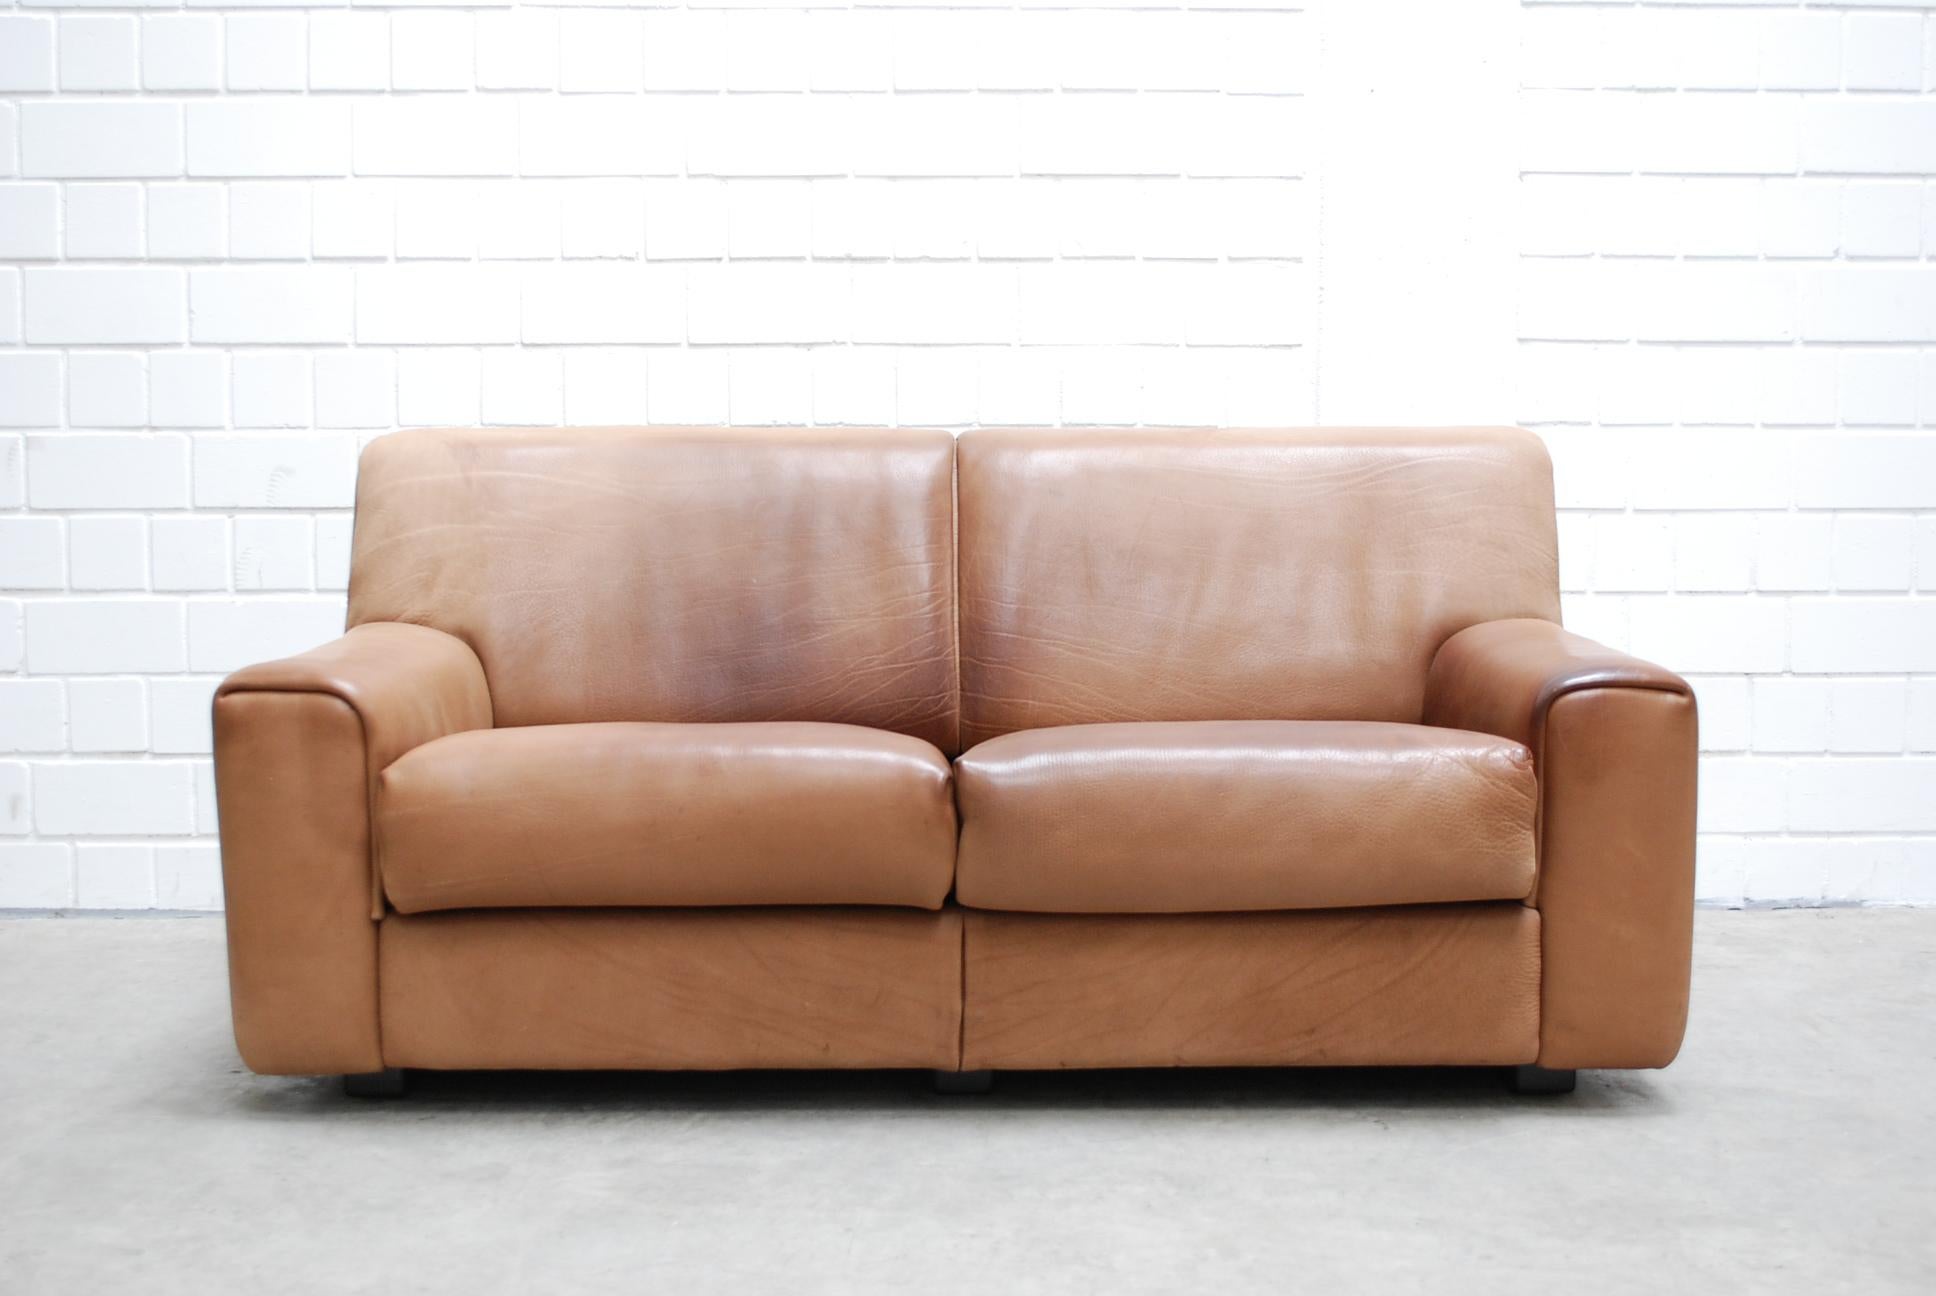 De Sede DS 42 neck leather sofa.
This DS-42 sofa was manufactured in Switzerland during the 1970s by De Sede and is upholstered in 3-5 mm thick, natural brown hide.
The leather has some patina.
  